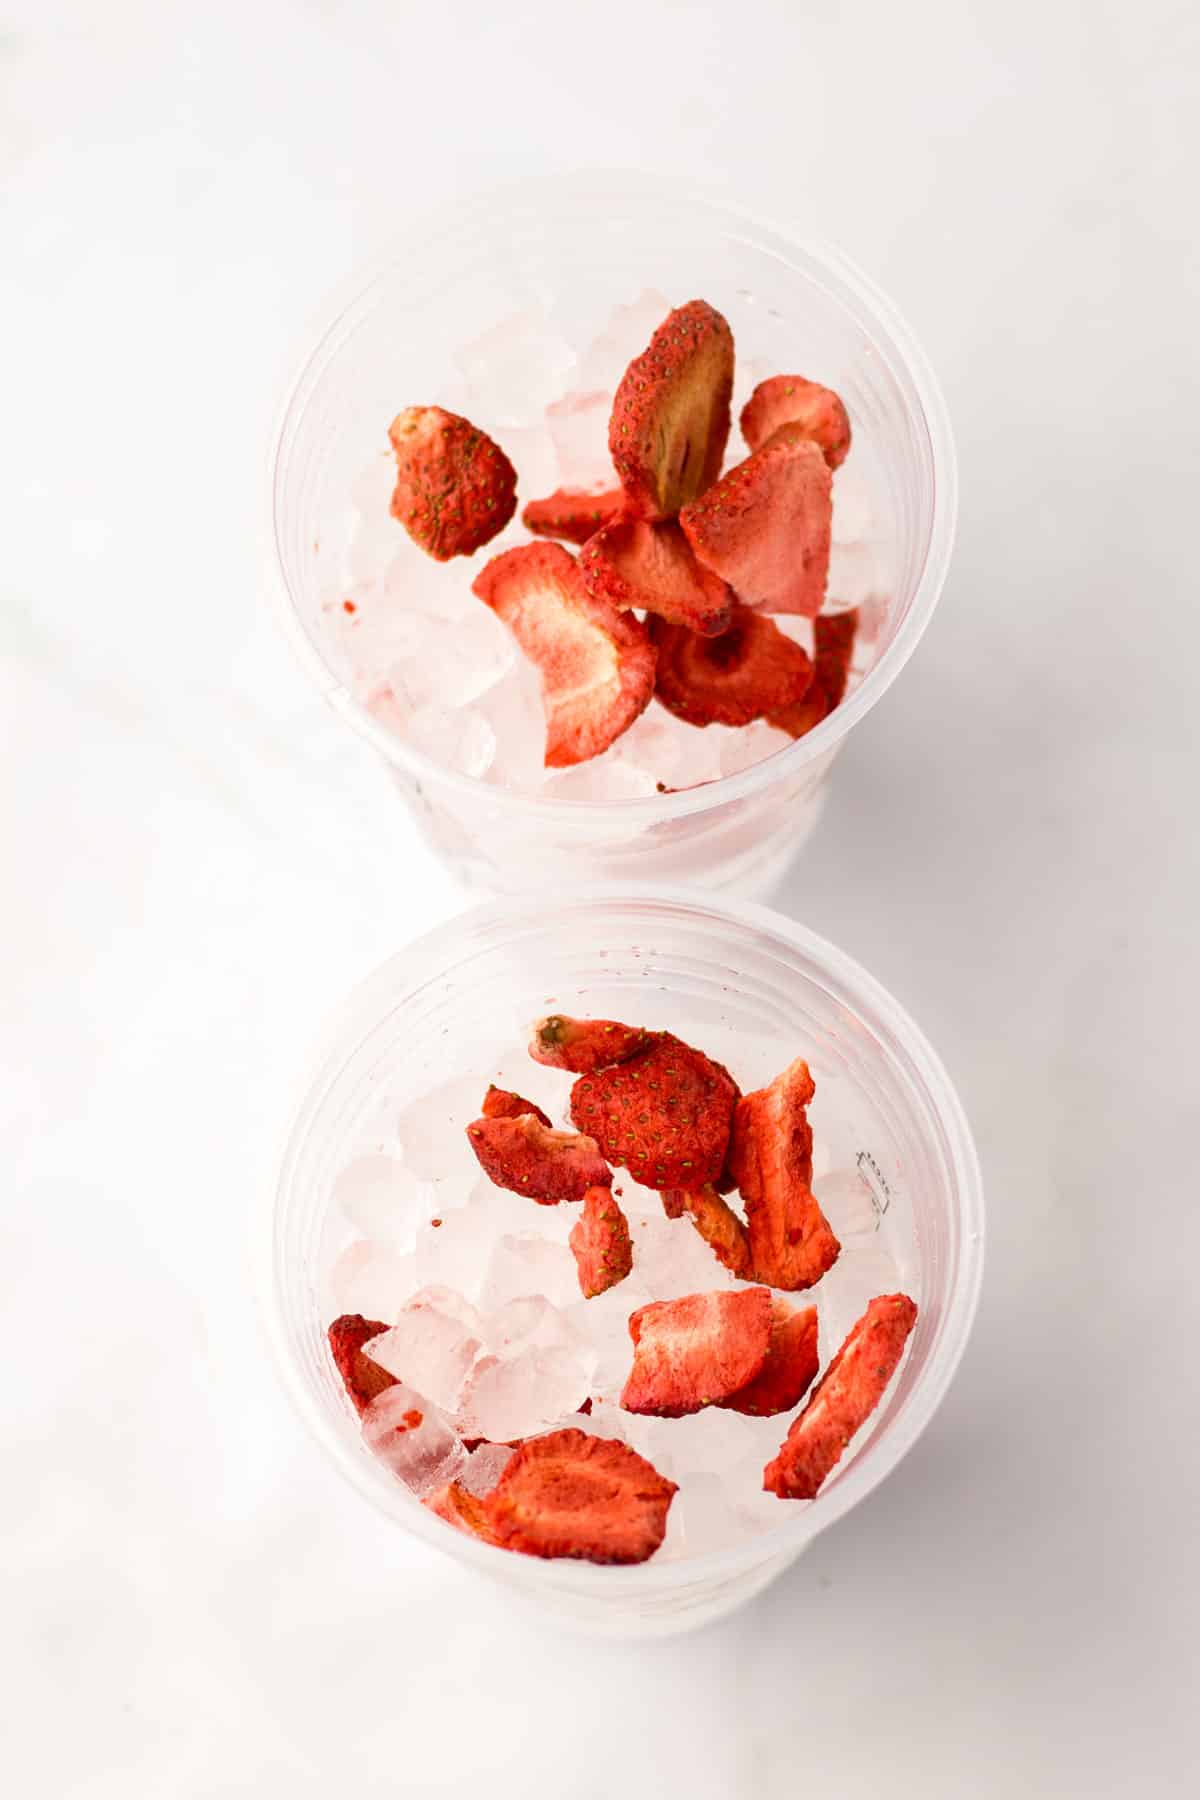 First process in preparing Copycat Starbucks Pink Drink is to add frozen dried strawberries in a cup of ice.